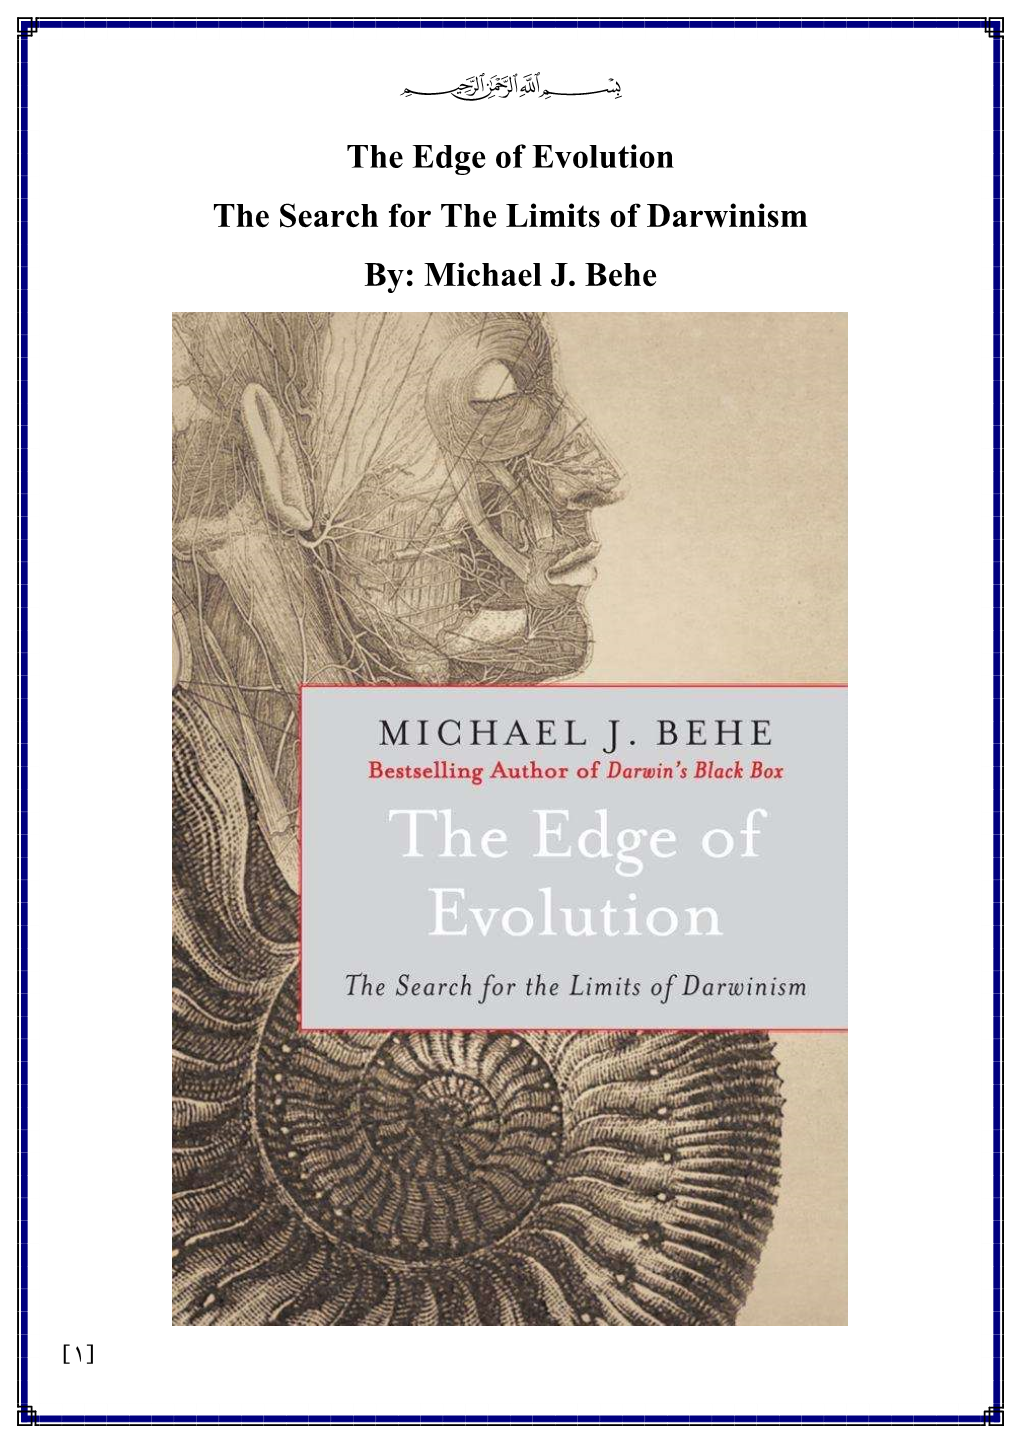 The Edge of Evolution the Search for the Limits of Darwinism By: Michael J